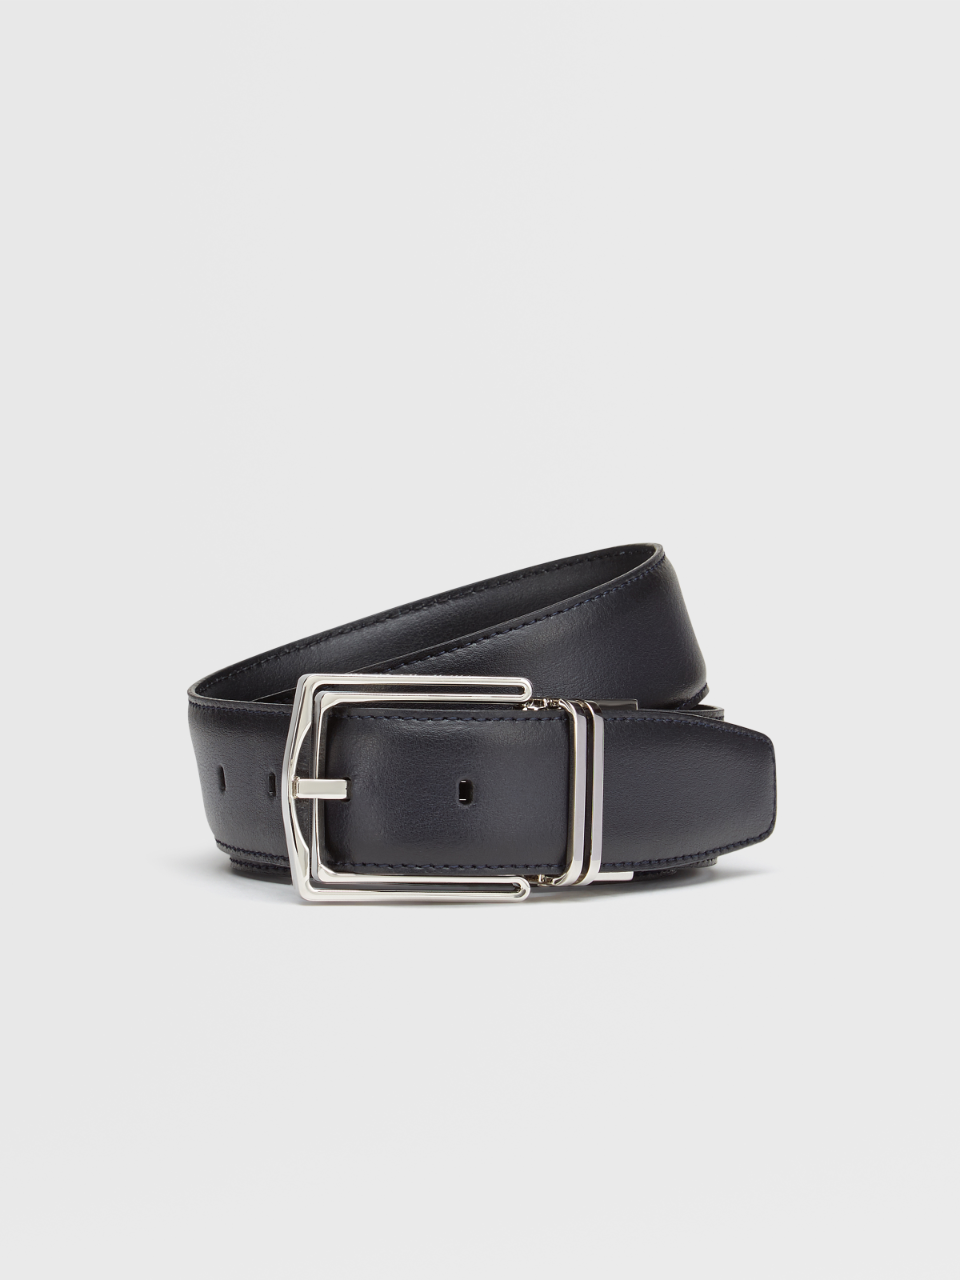 Navy Blue Leather and Black Leather Reversible Belt